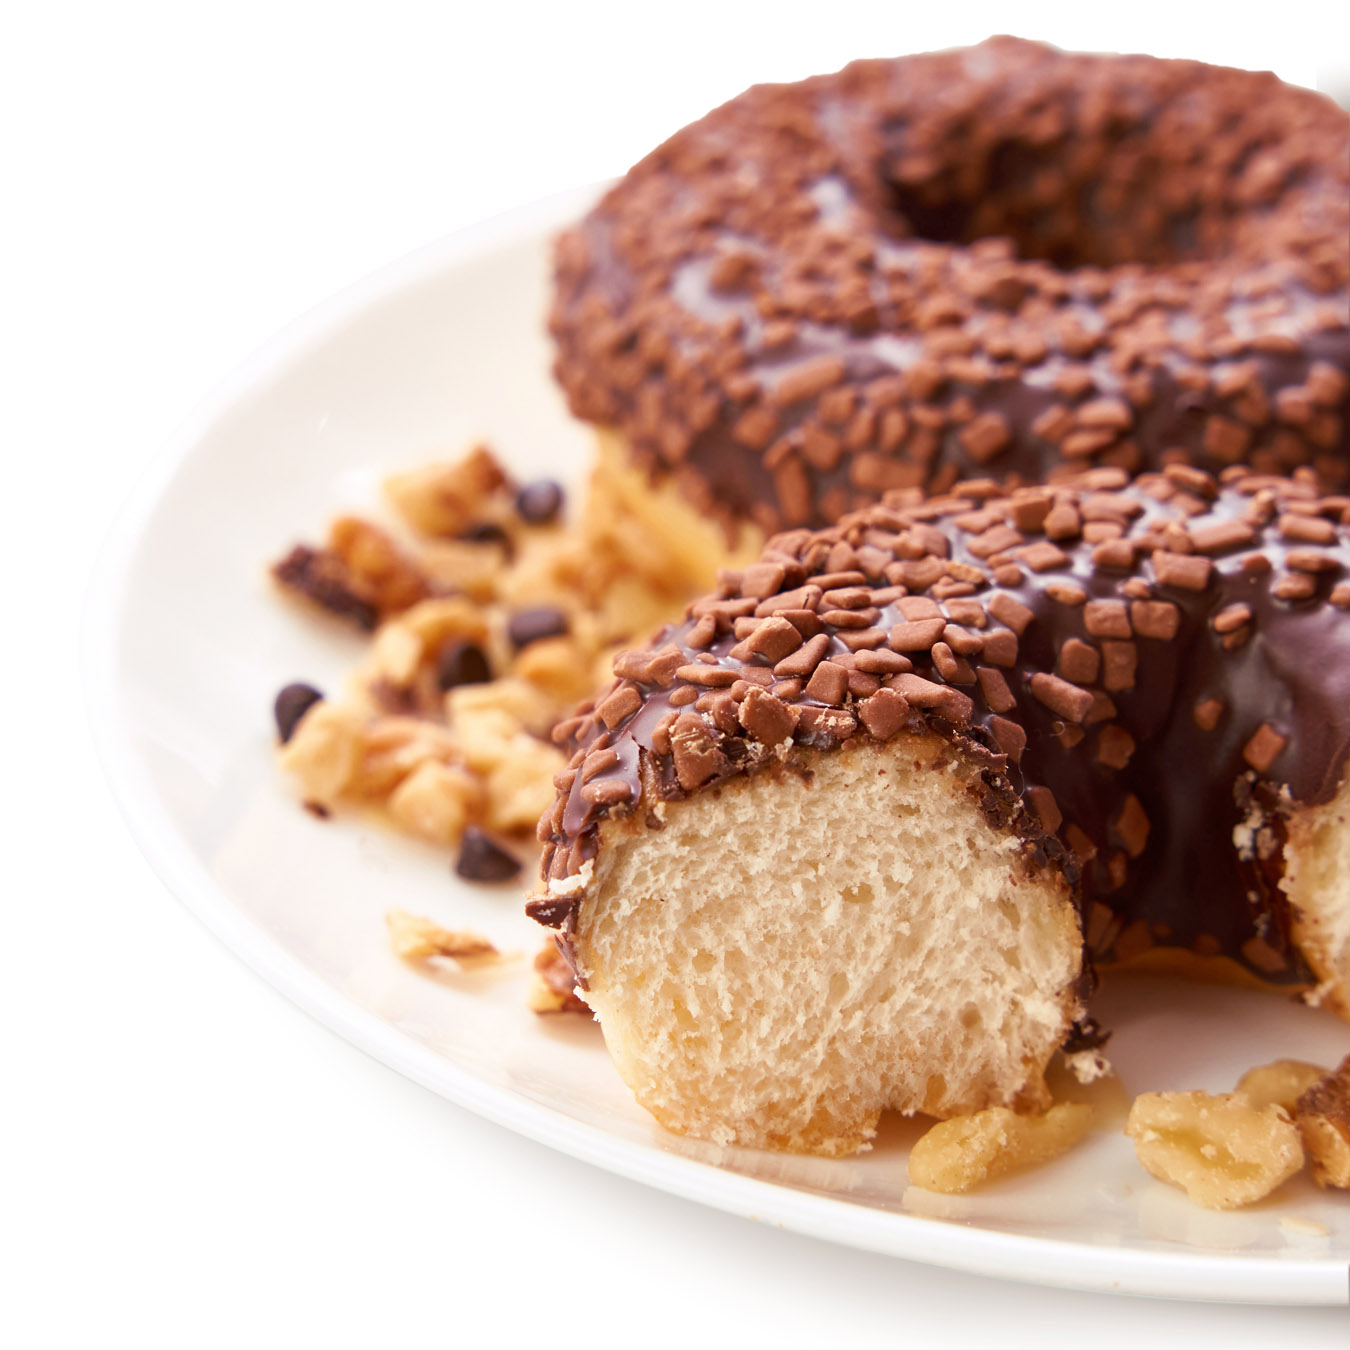 Donut with chocolate crumbs 55g 2